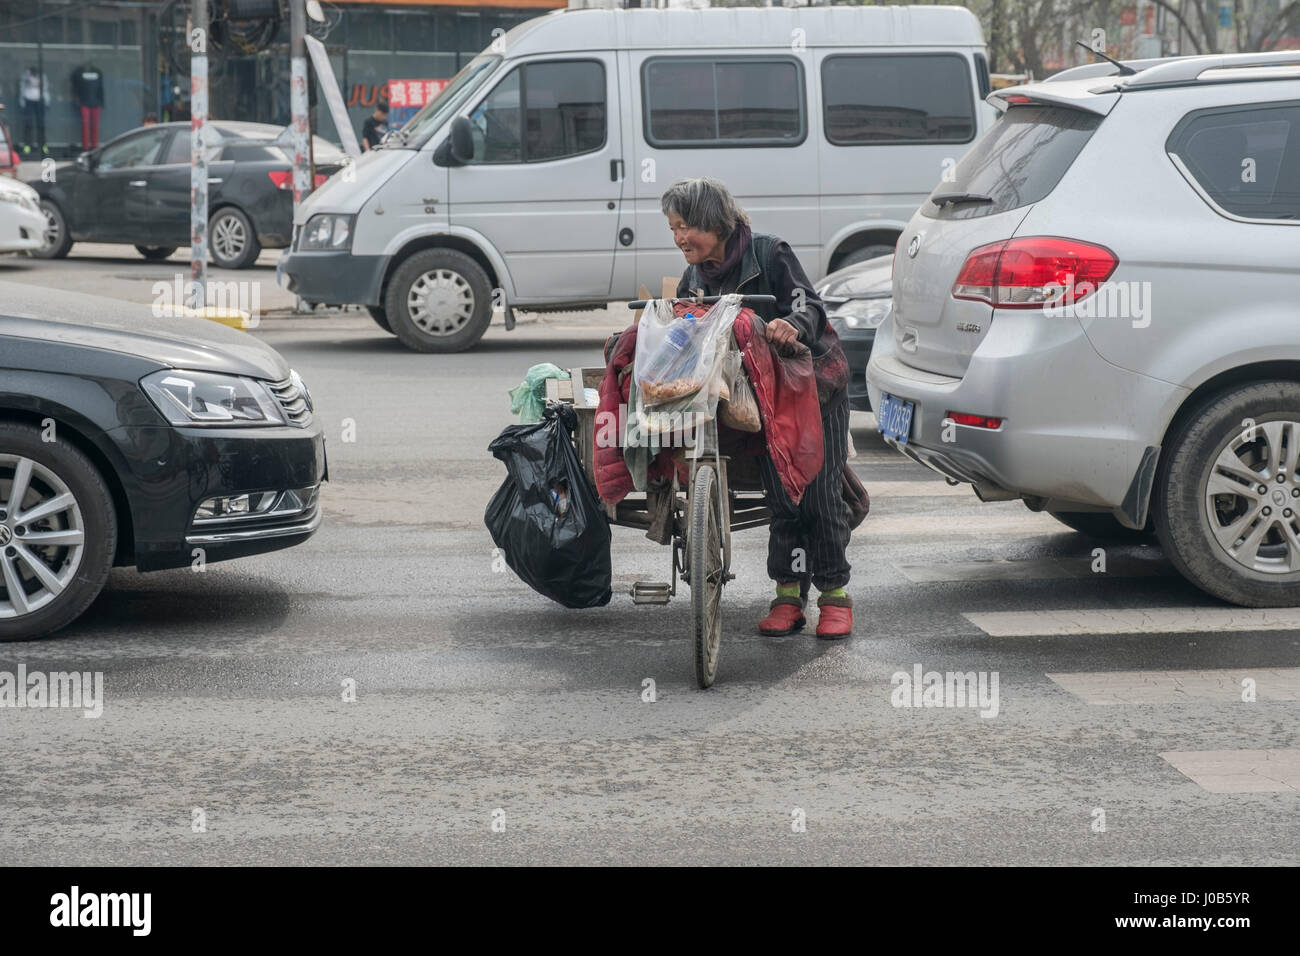 An elderly poor woman pushes a tricycle through cars waiting traffic light in Xiong County, Hebei province, China. 09-Apr-2017 Stock Photo